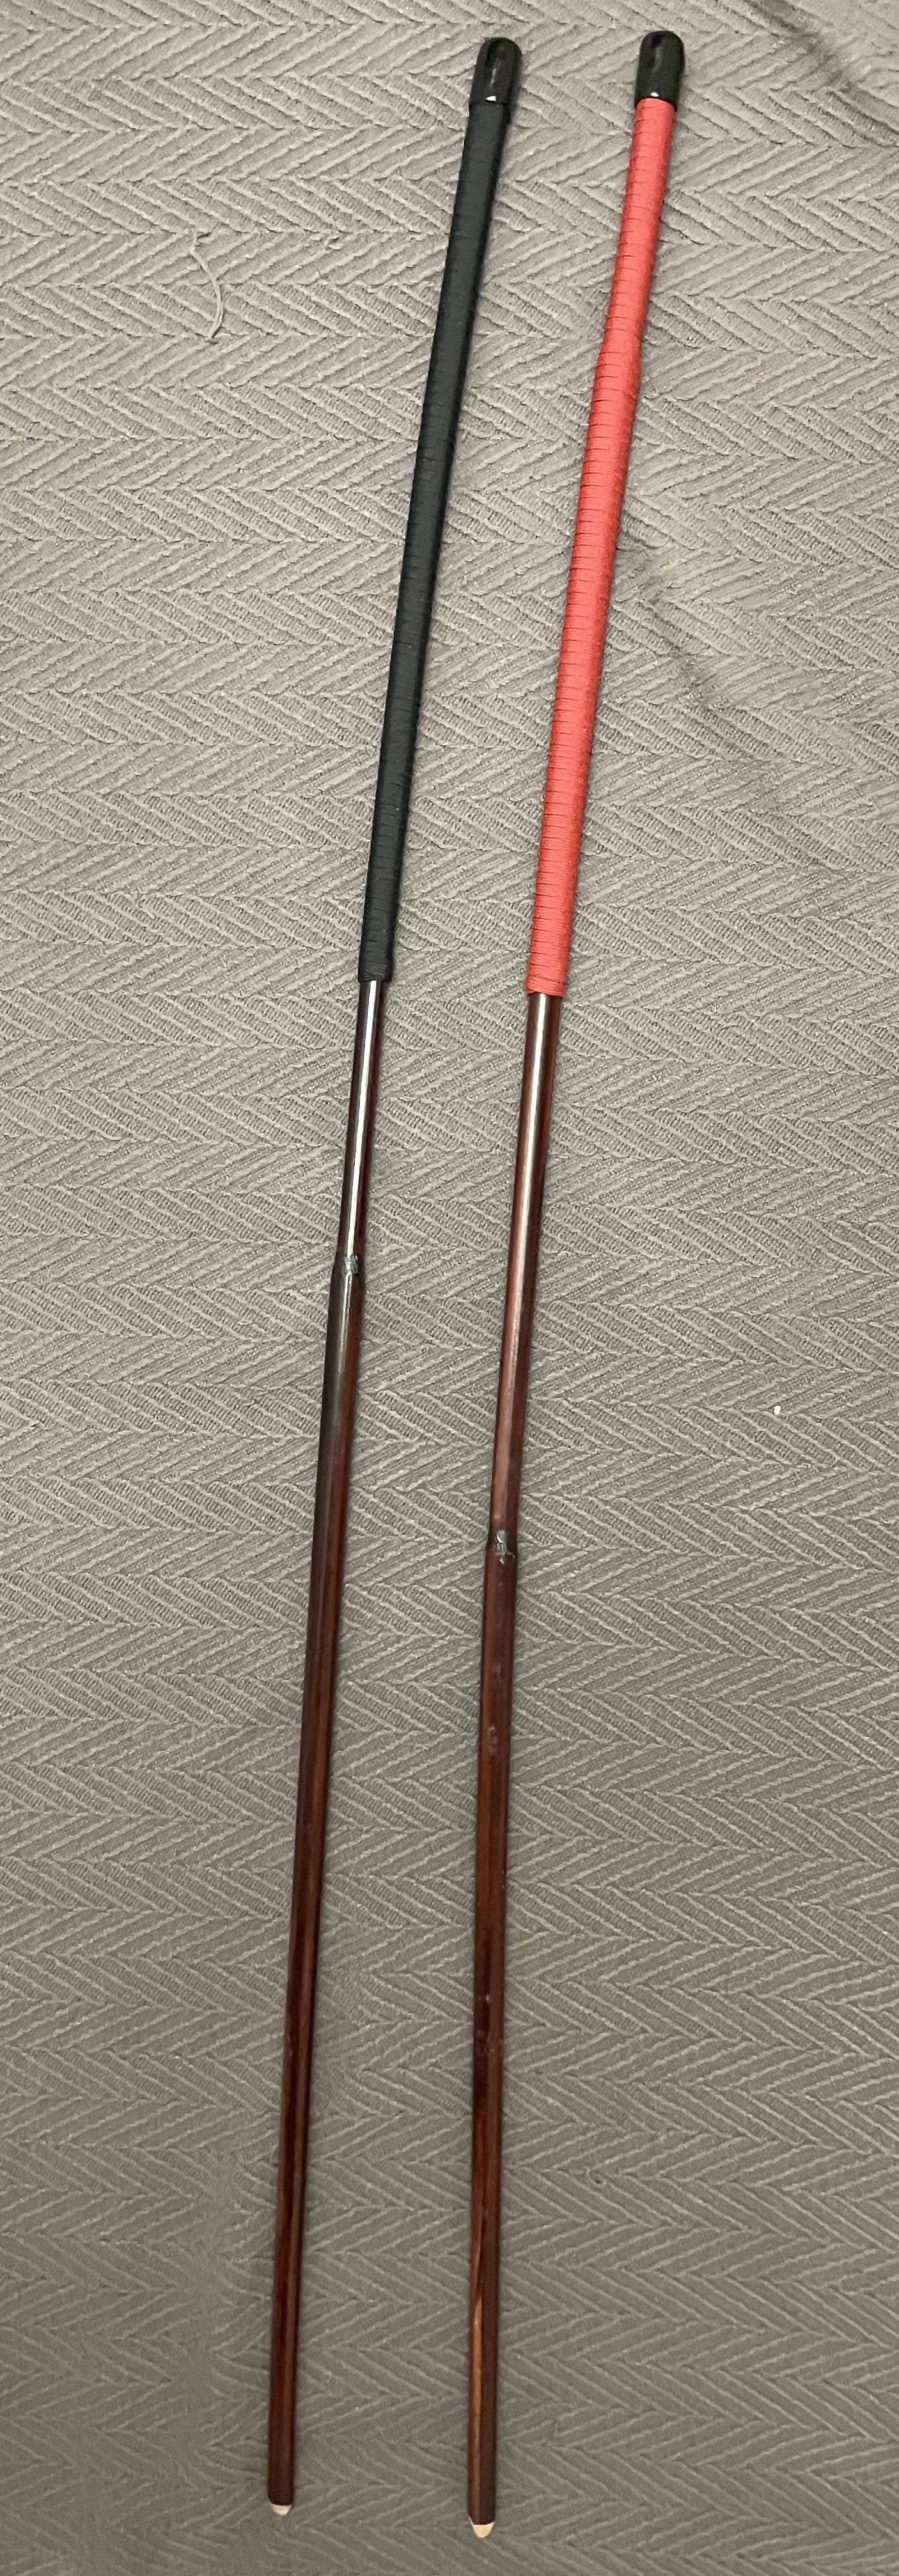 The Regina  Smoked Dragon Rattan Canes - 95-100 cms Length - Red or Black Paracord / Kangaroo Leather Handles - Englishvice Canes